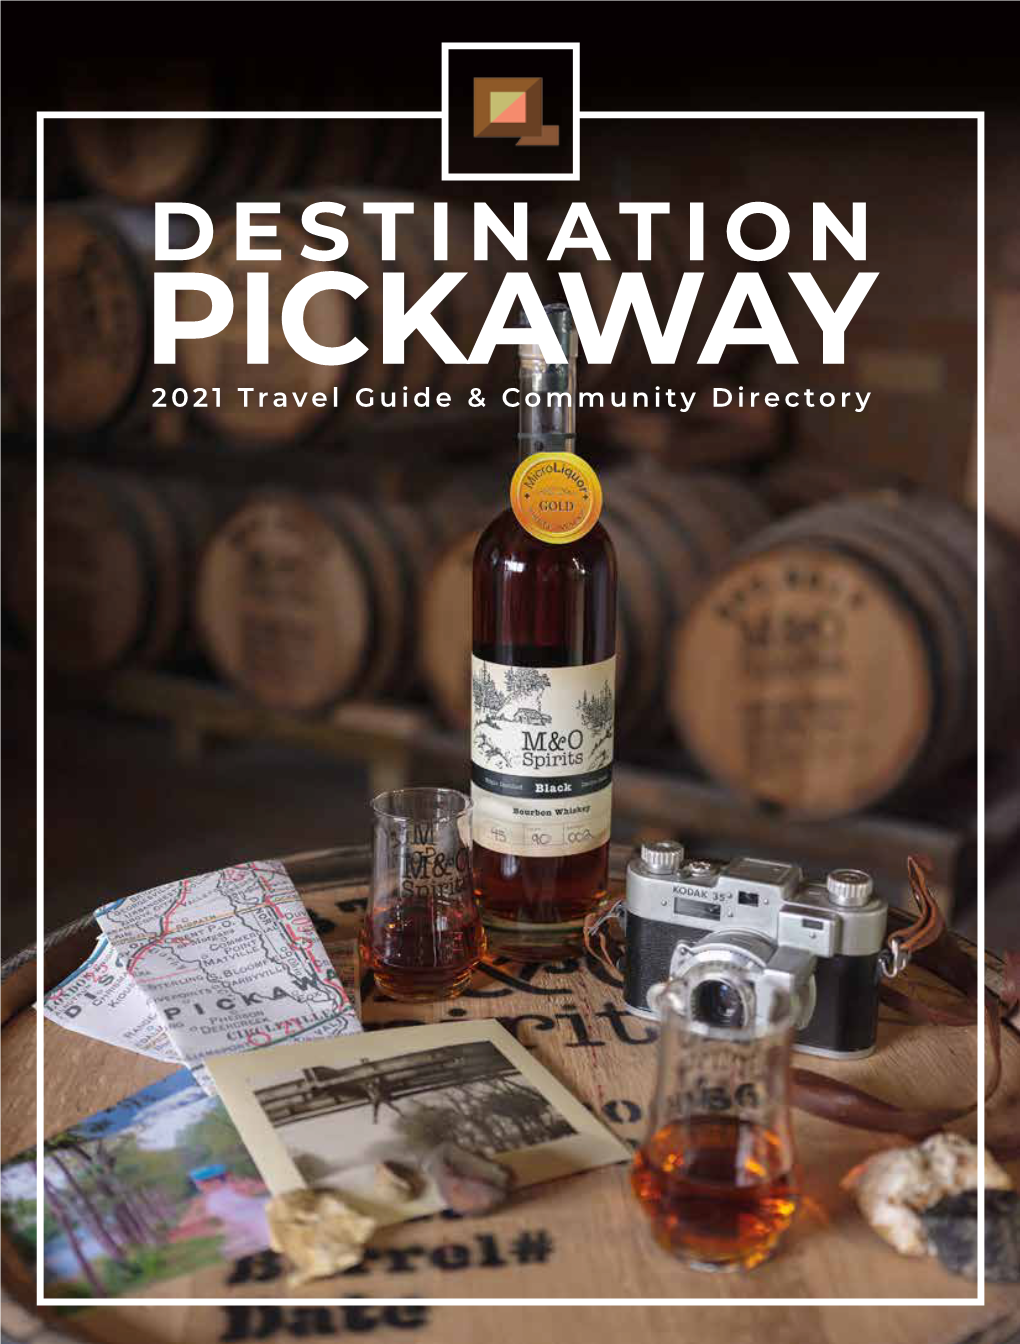 DESTINATION PICKAWAY 2021 Travel Guide & Community Directory ALL the CARE YOU EXPECT